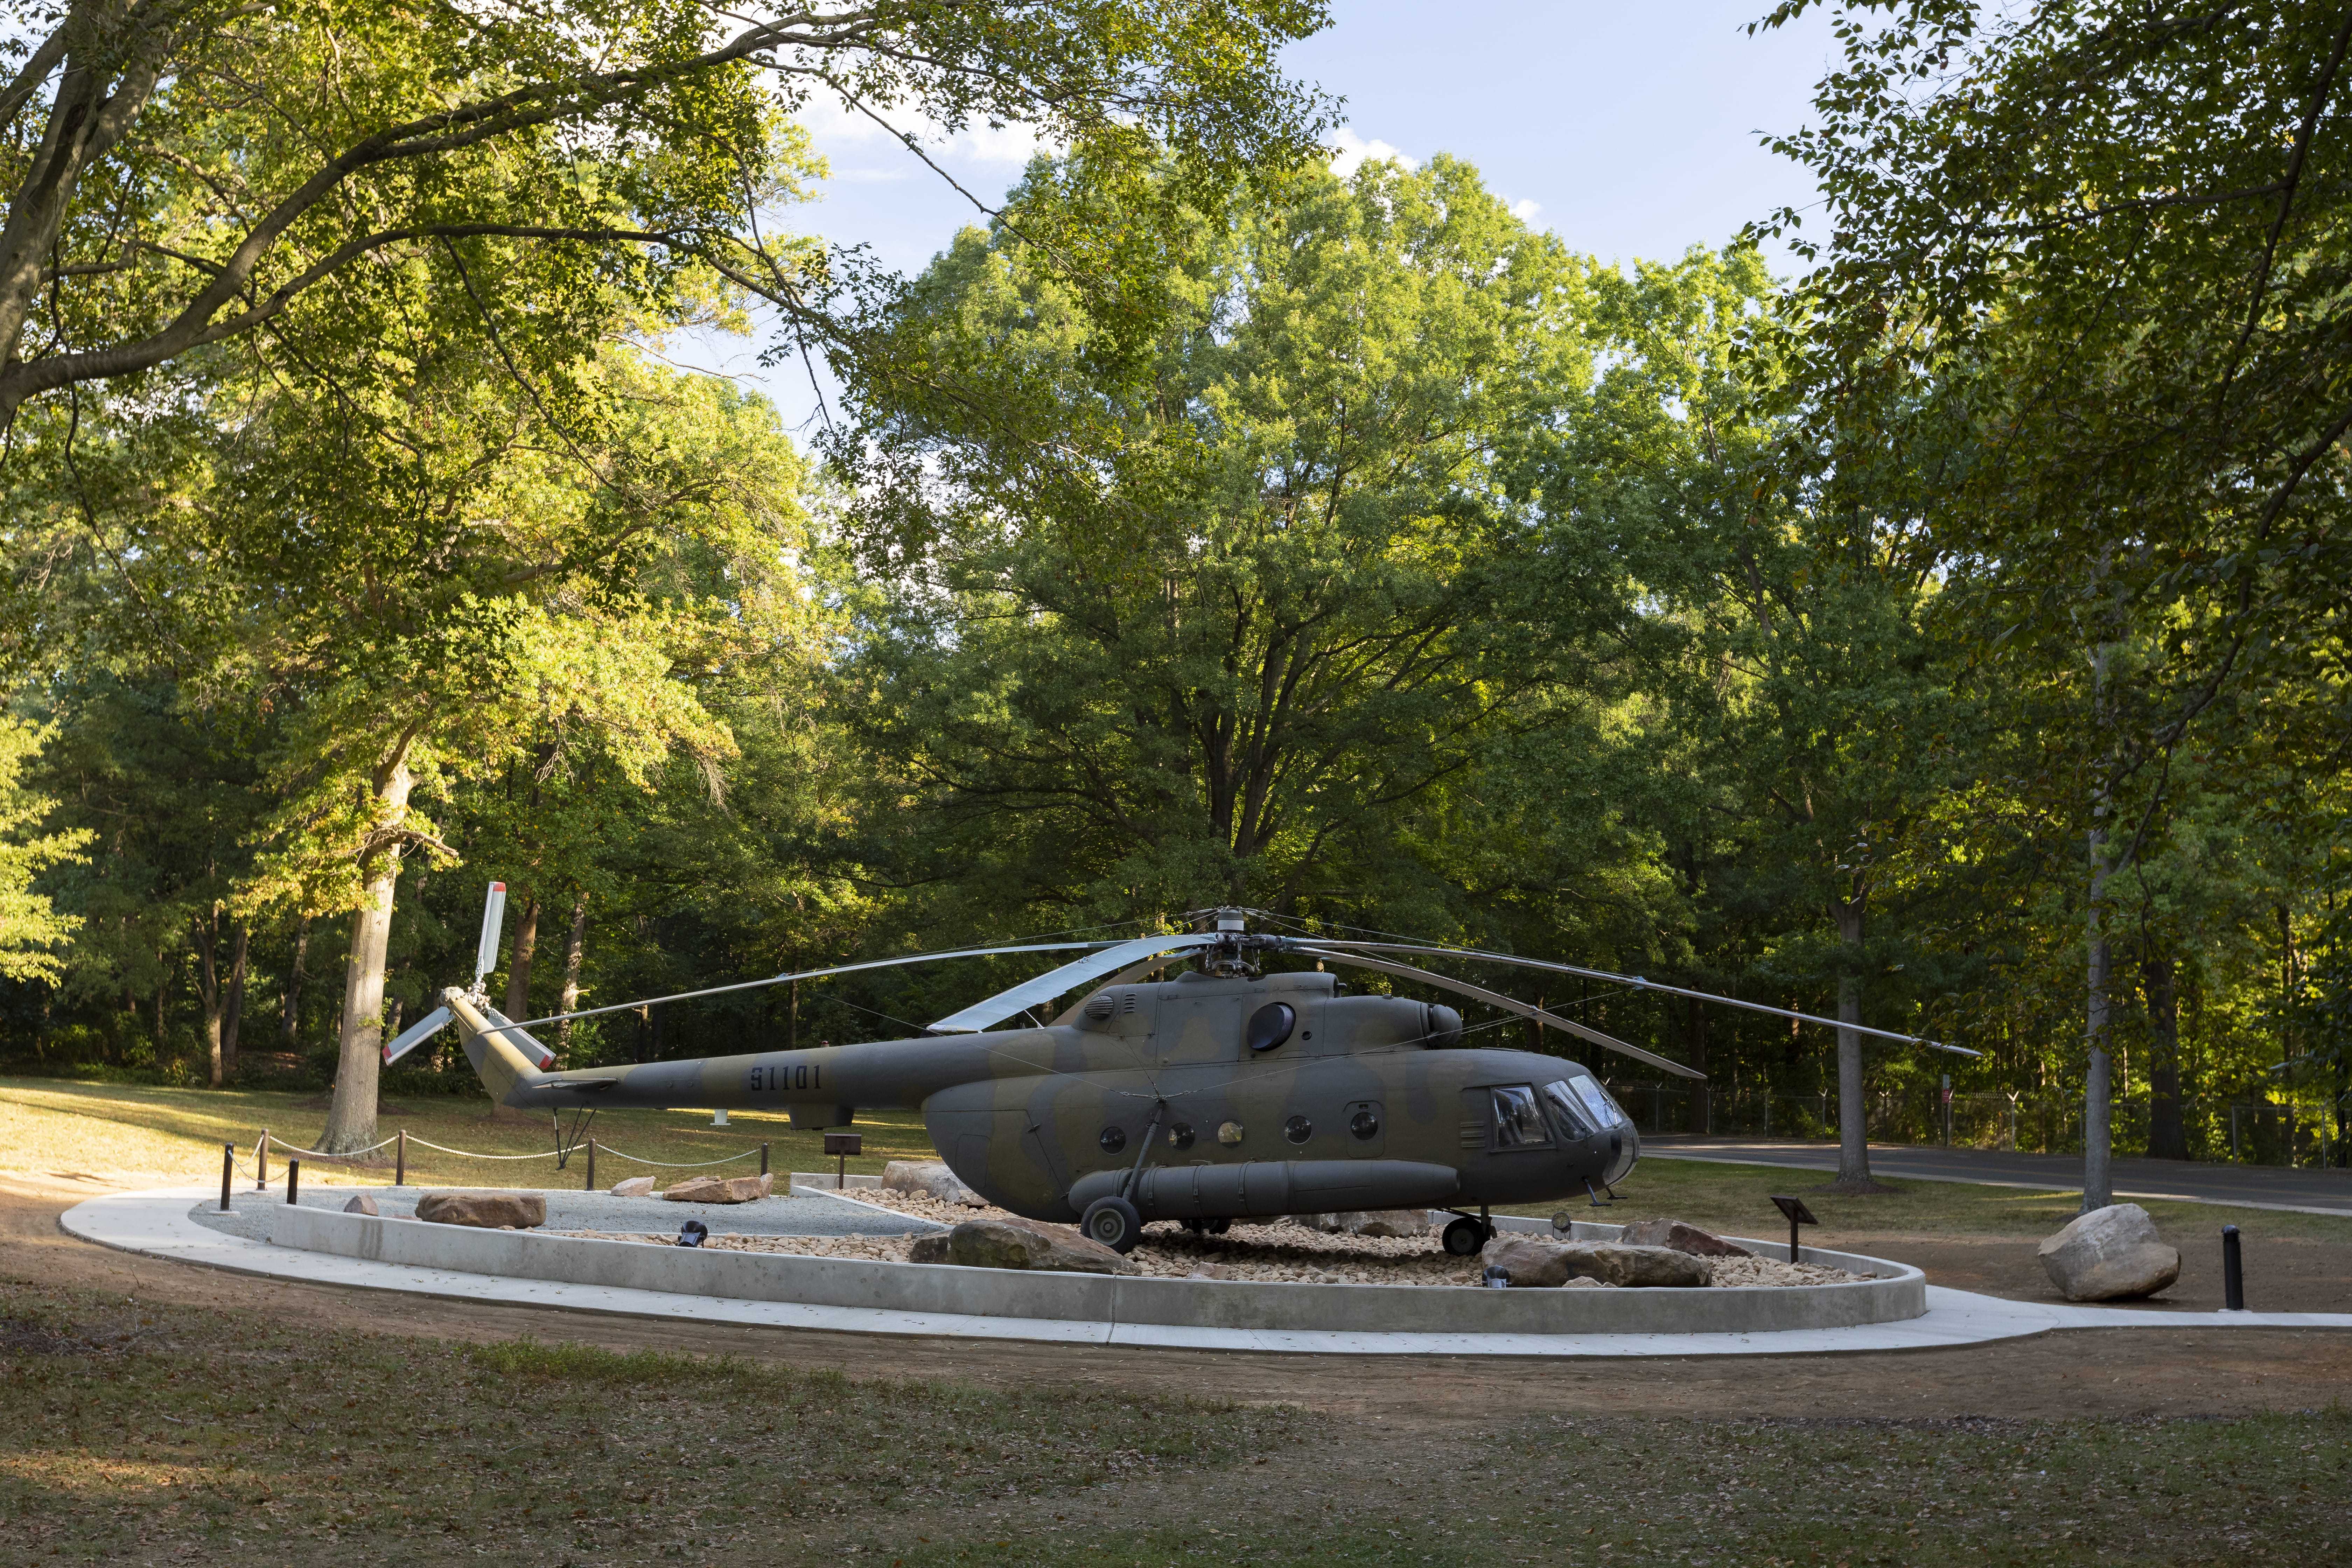 Profile view of Mi-17 helicopter on display at CIA Headquarters.